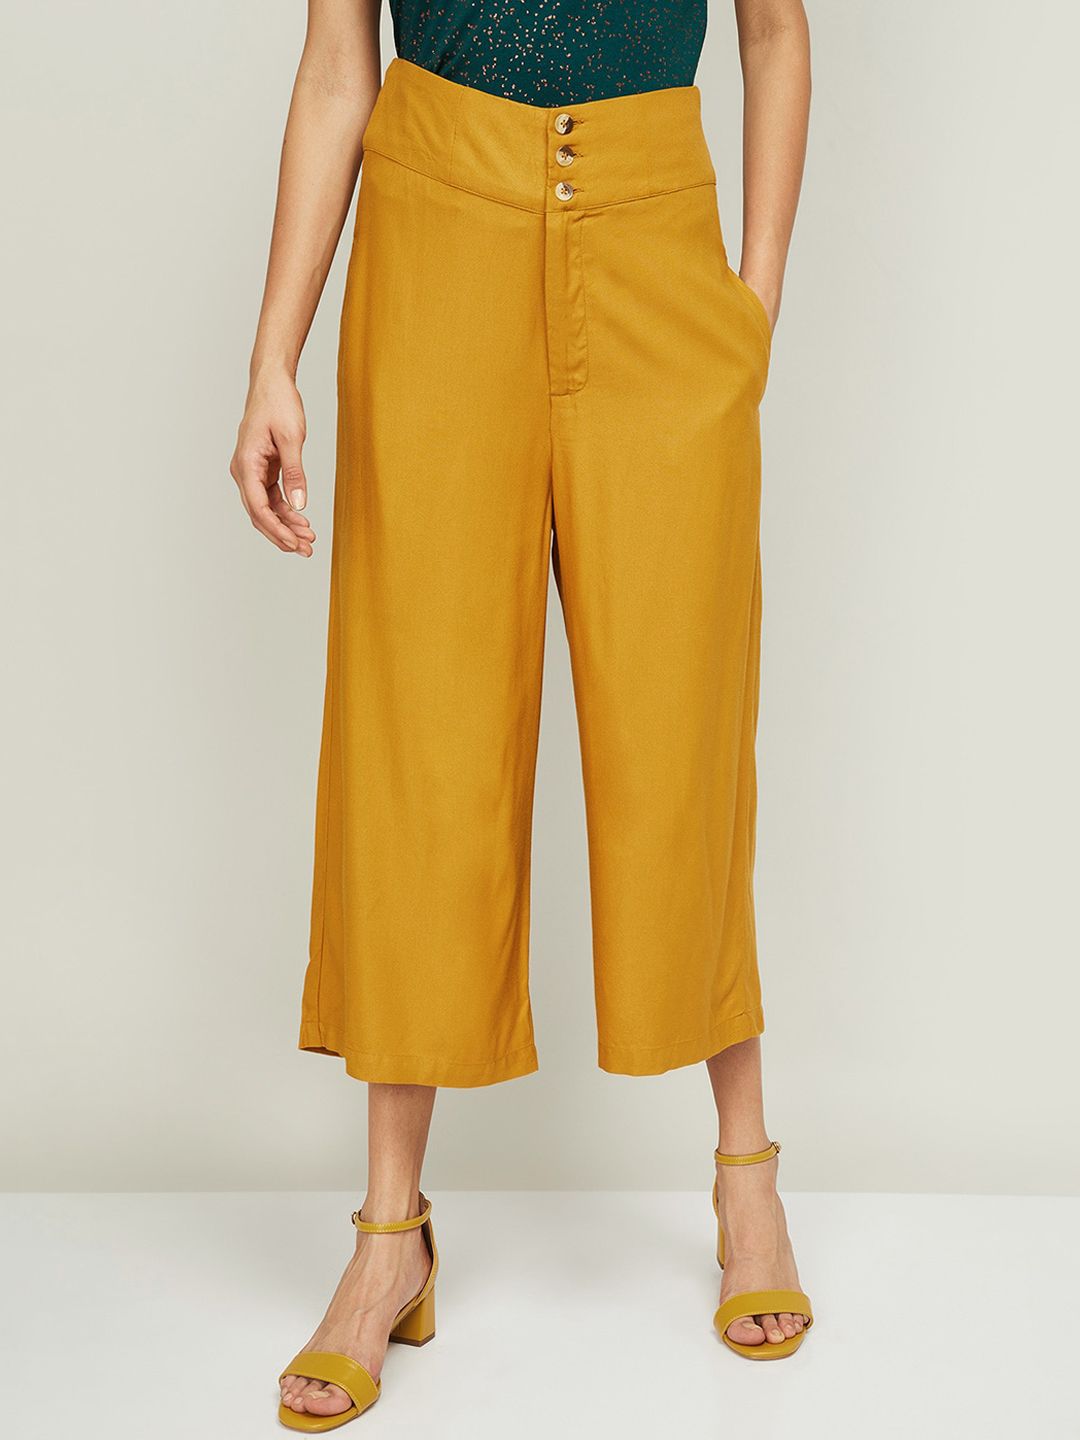 Ginger by Lifestyle Women Mustard Yellow Culottes Trousers Price in India